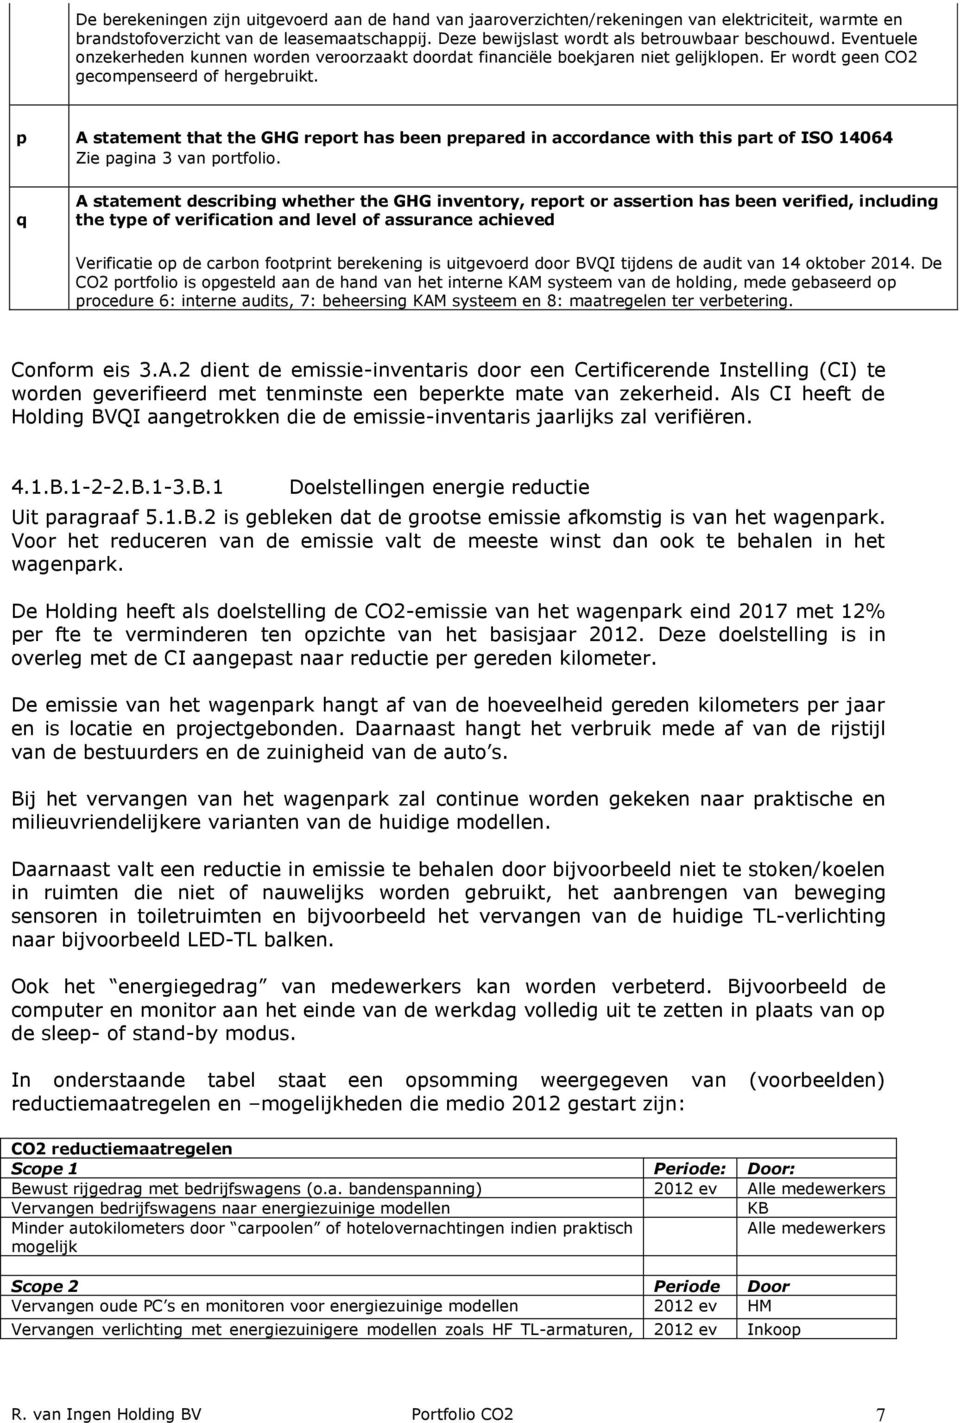 p A statement that the GHG report has been prepared in accordance with this part of ISO 14064 Zie pagina 3 van portfolio.